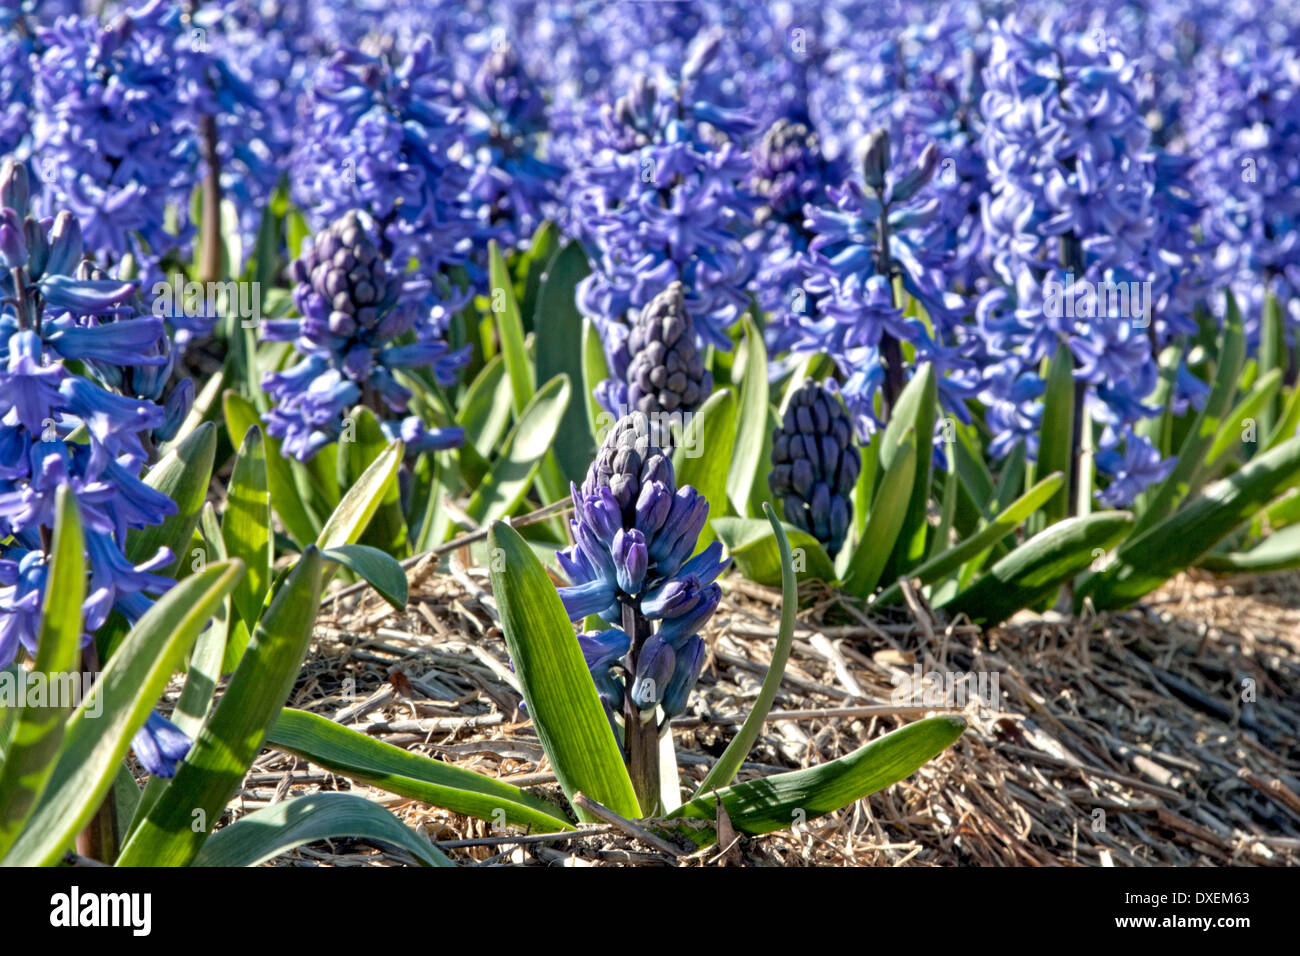 Bulb fields in spring: Low angle view of blue hyacinths, Noordwijkerhout, South Holland, The Netherlands. Stock Photo